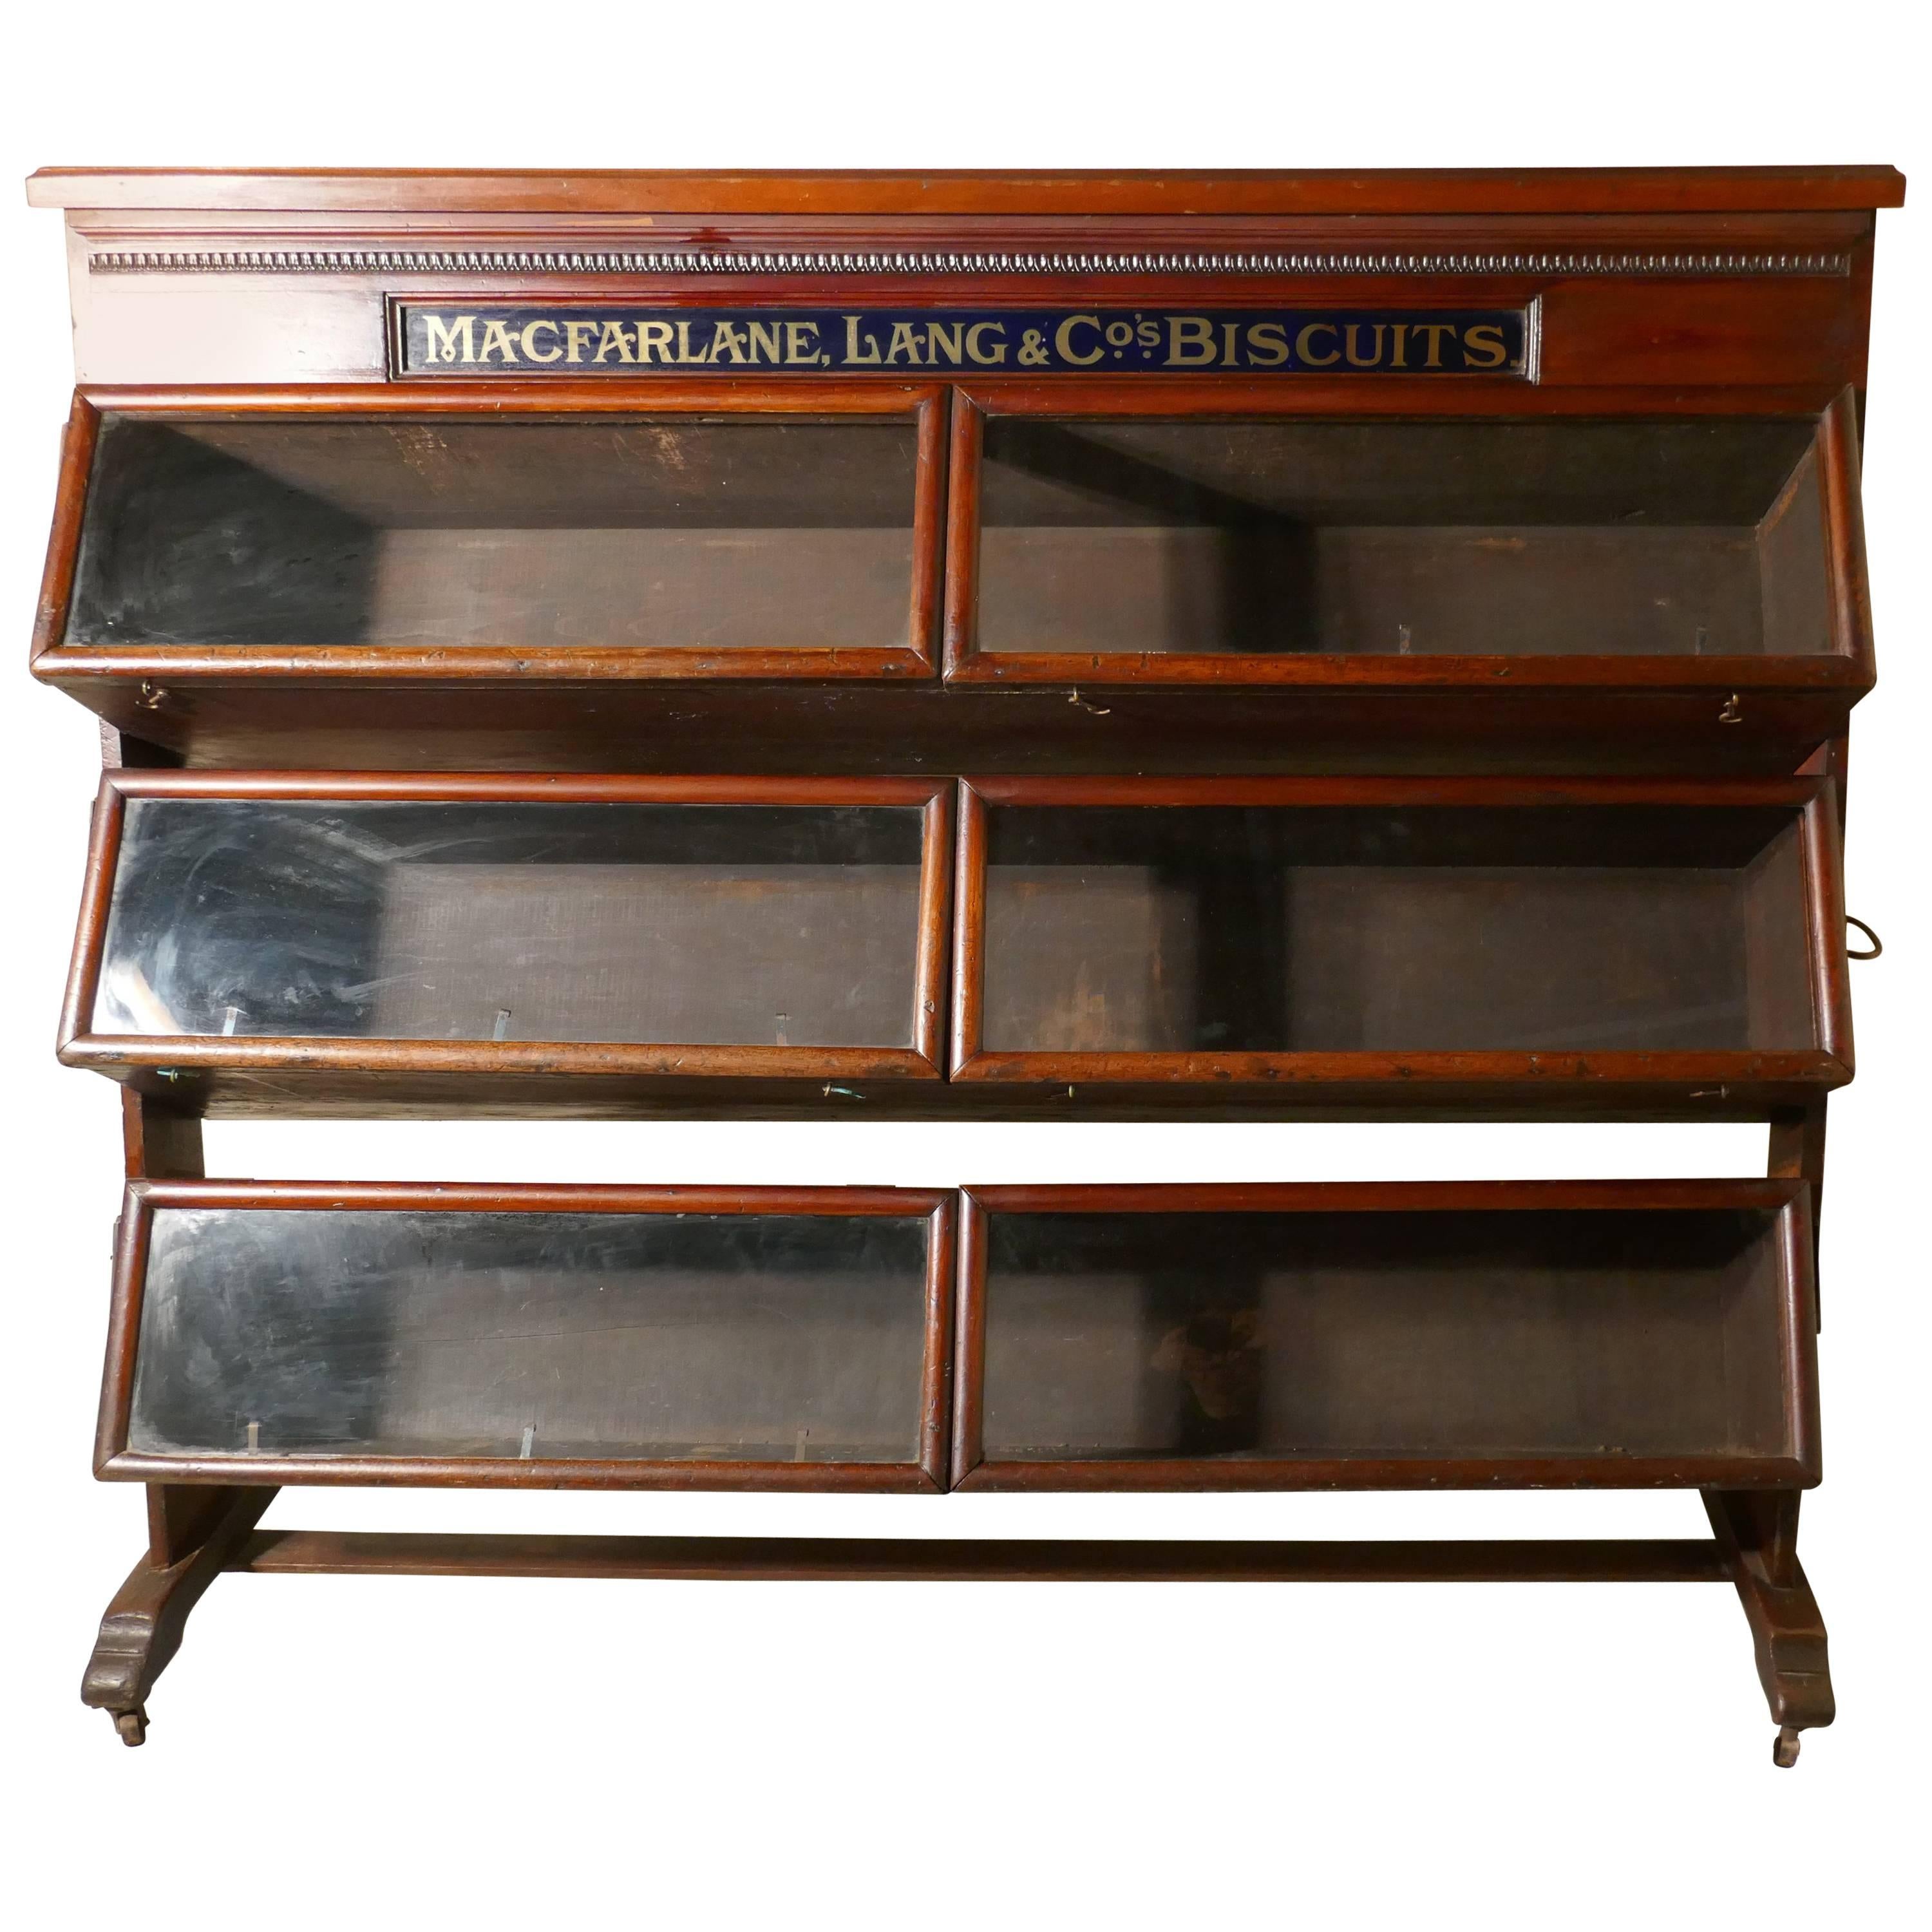 MacFarlane. Lang and Co's Biscuits Shop Display Cabinet 